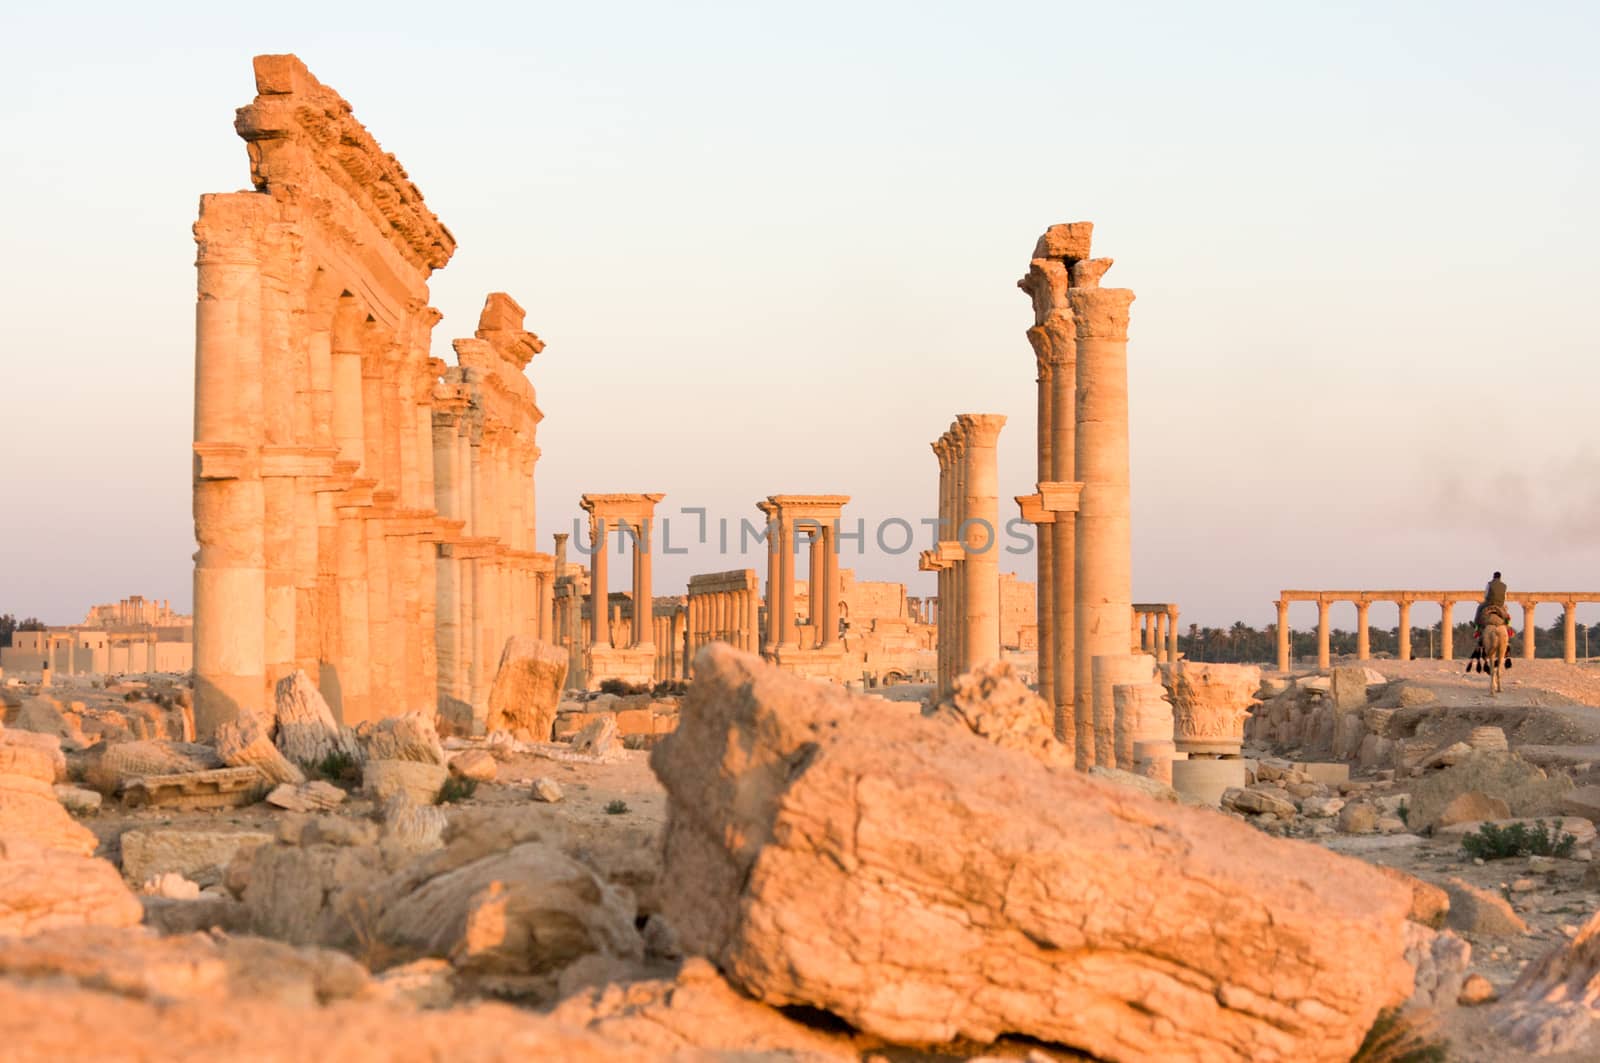 Palmyre Syria 2009 This ancient site has many Roman ruins, these standing columns shot in late afternoon sun with the citadel on the hill in the background . High quality photo